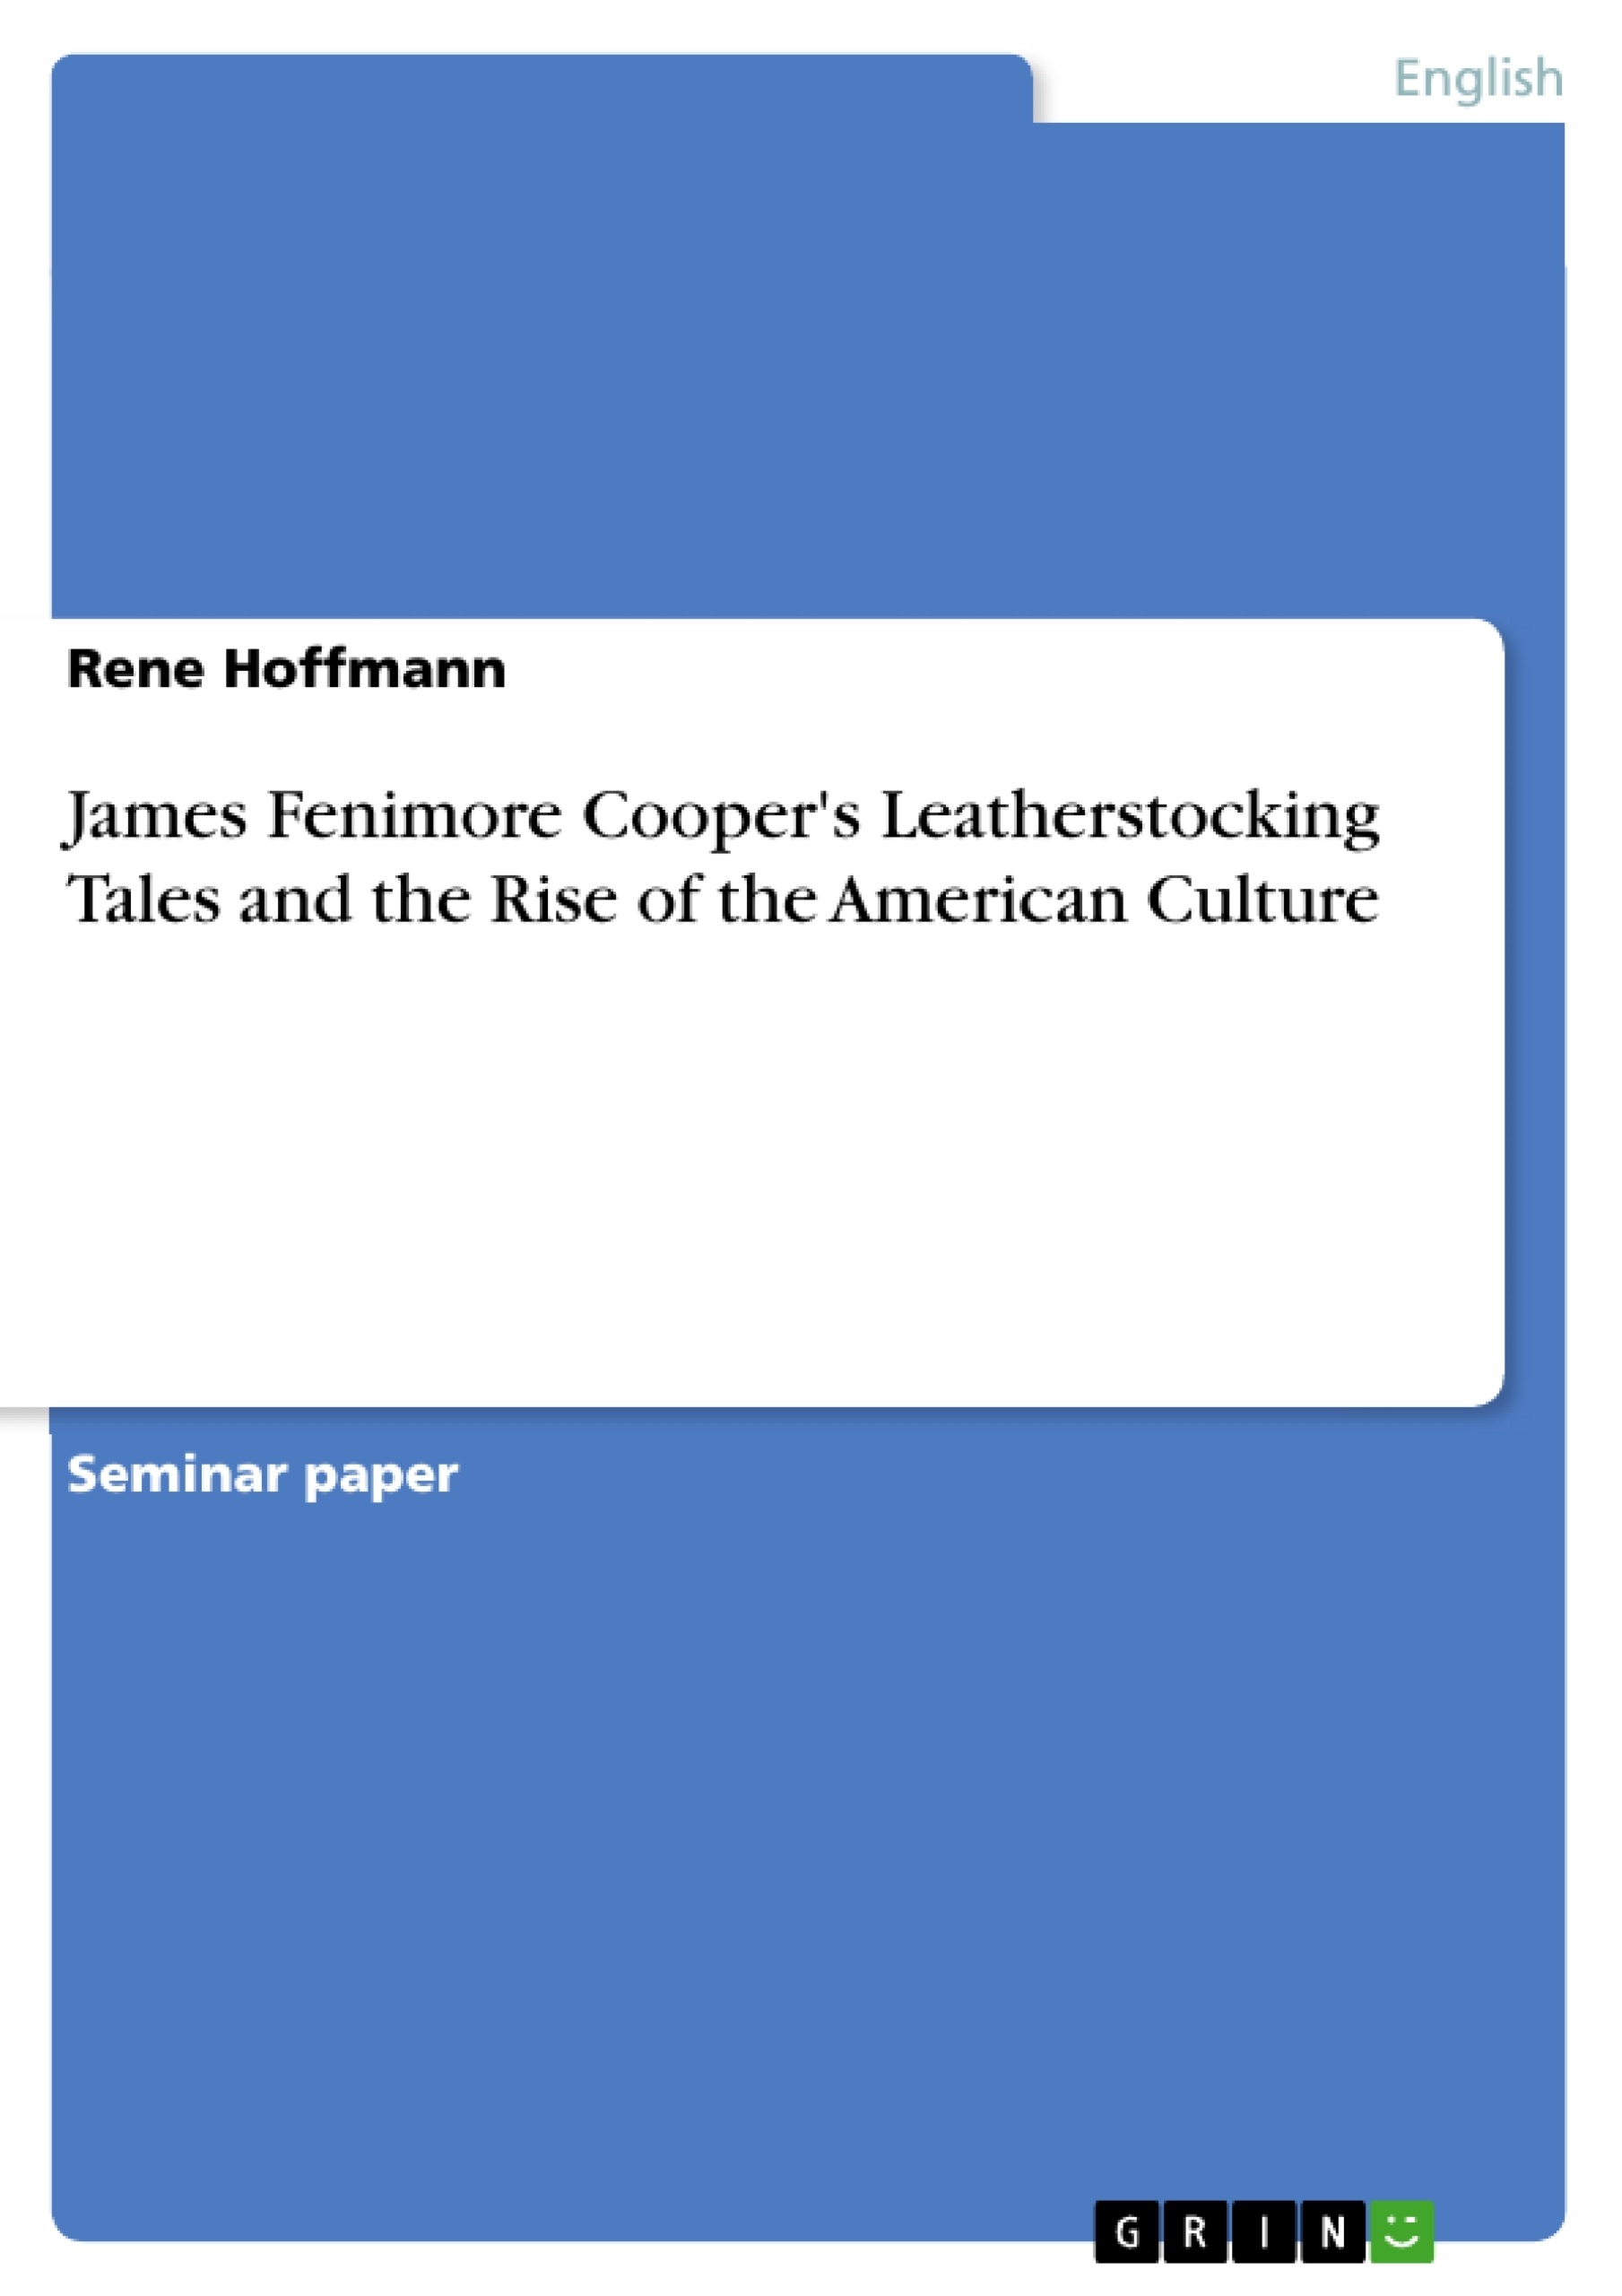 Titel: James Fenimore Cooper's Leatherstocking Tales and the Rise of the American Culture